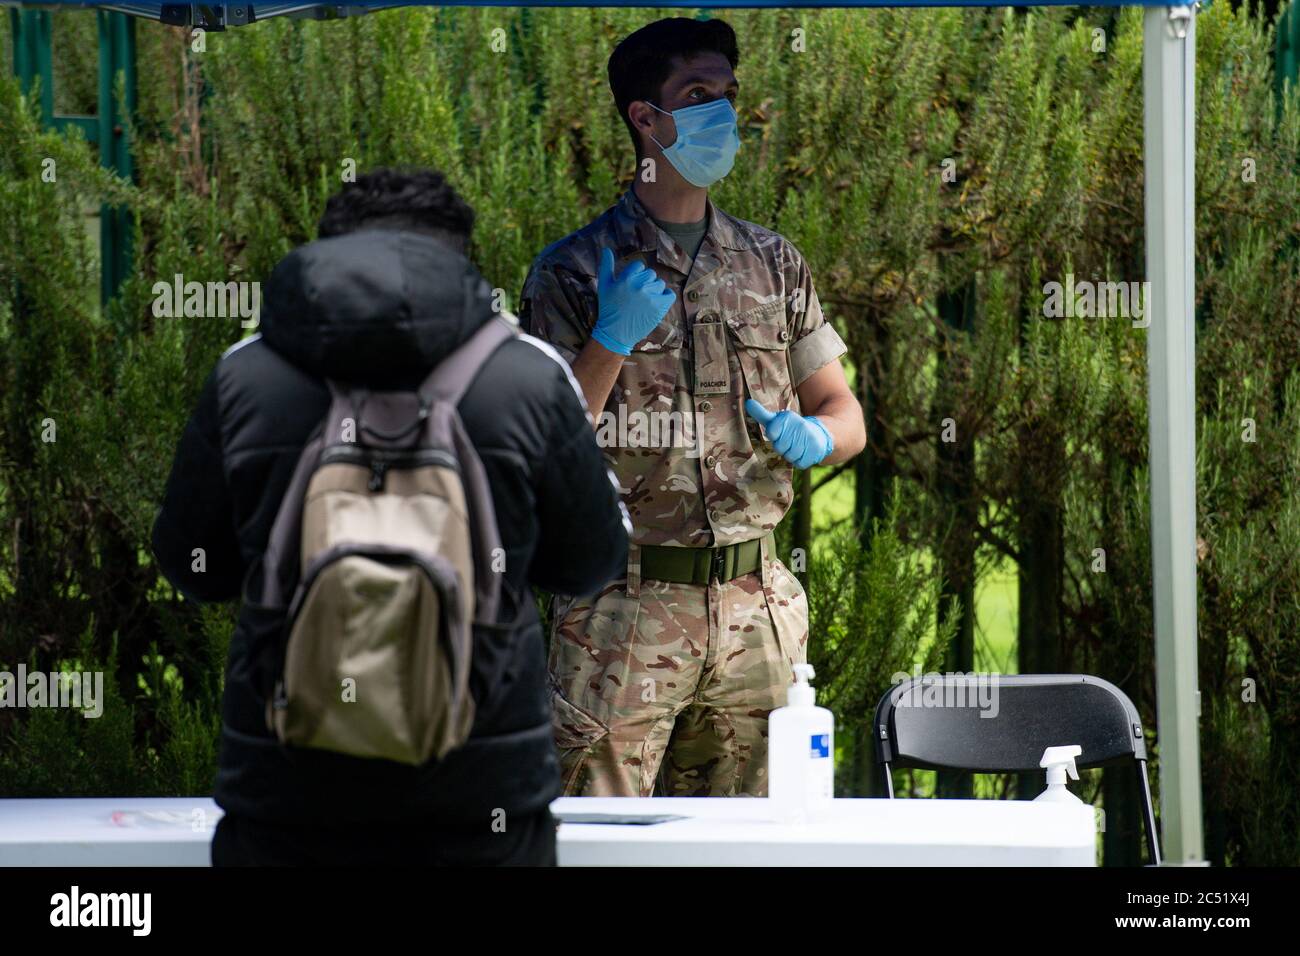 A member of the military instructs a person taking a test at a Covid-19 testing centre in Spinney Hill Park in Leicester, after the Health Secretary Matt Hancock imposed a local lockdown following a spike in coronavirus cases in the city. Stock Photo